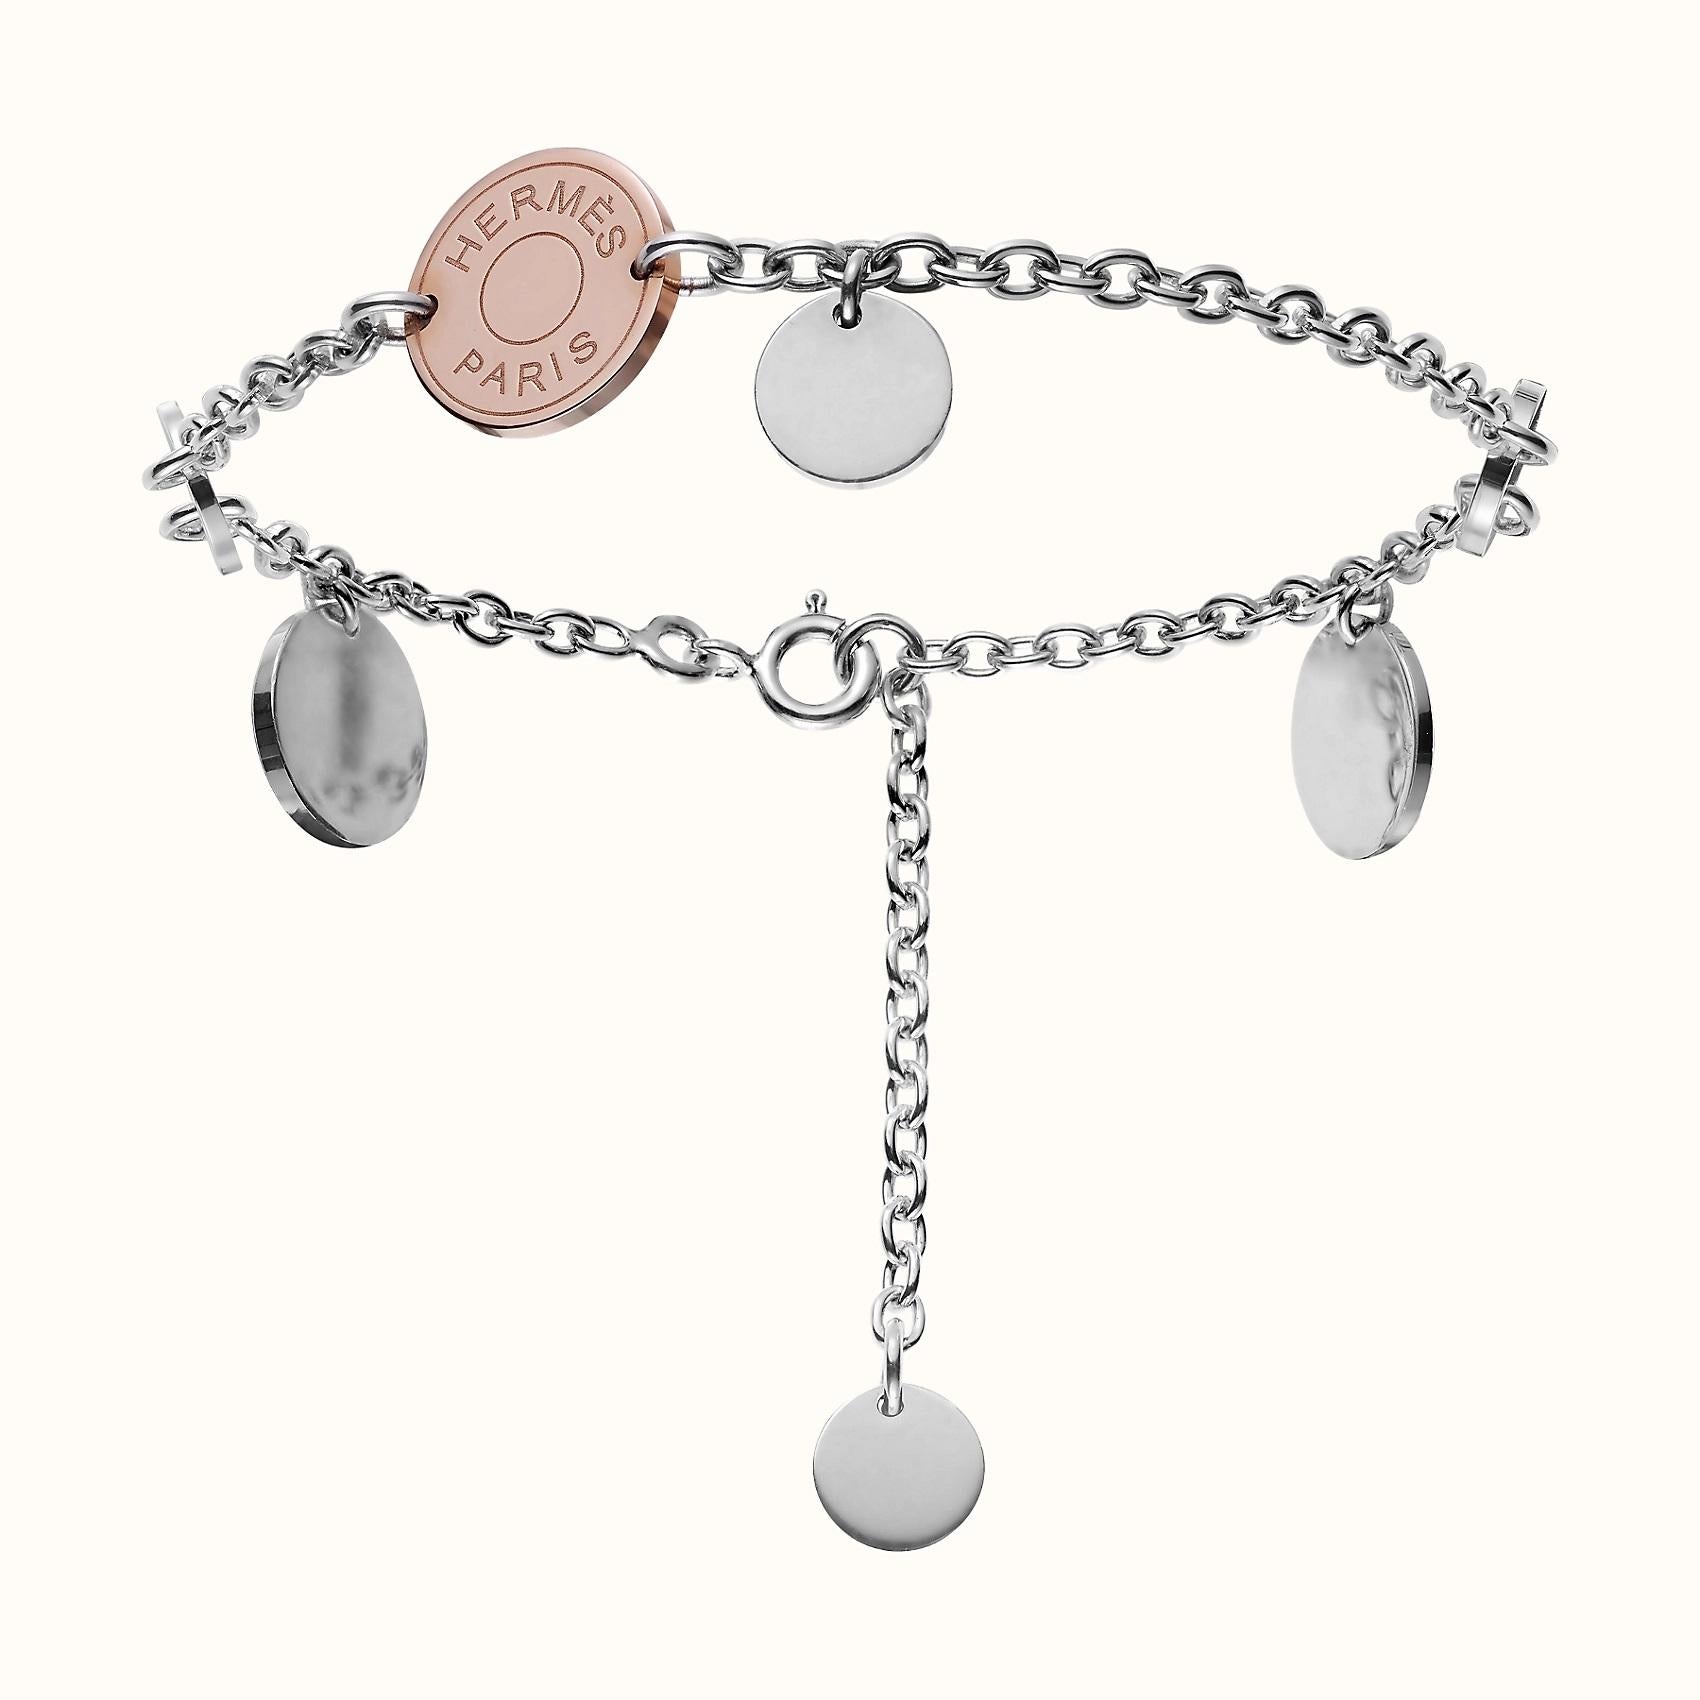 Bracelet in sterling silver and rose gold. Rose gold 750/1000. Silver 925/1000. Chain length: 16.4 cm.
